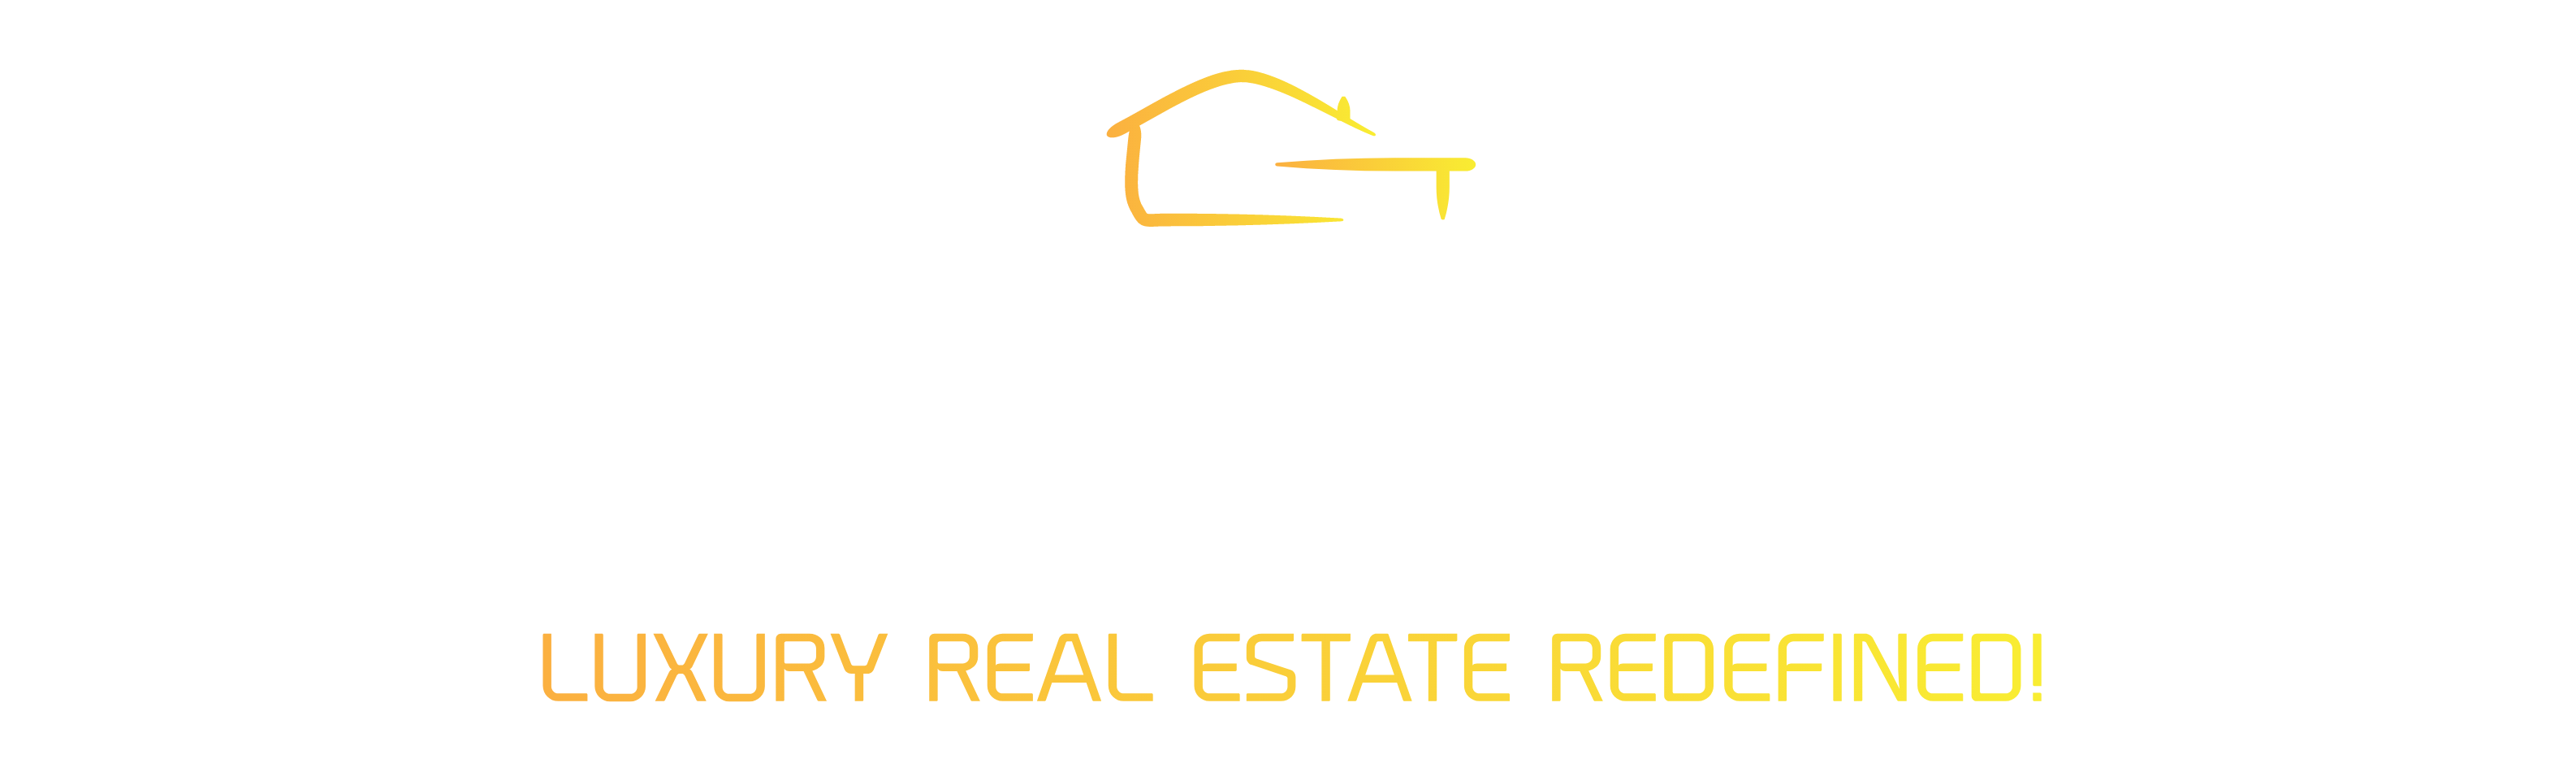 Aldrich Property Consultants-Luxury Real Estate Redefined